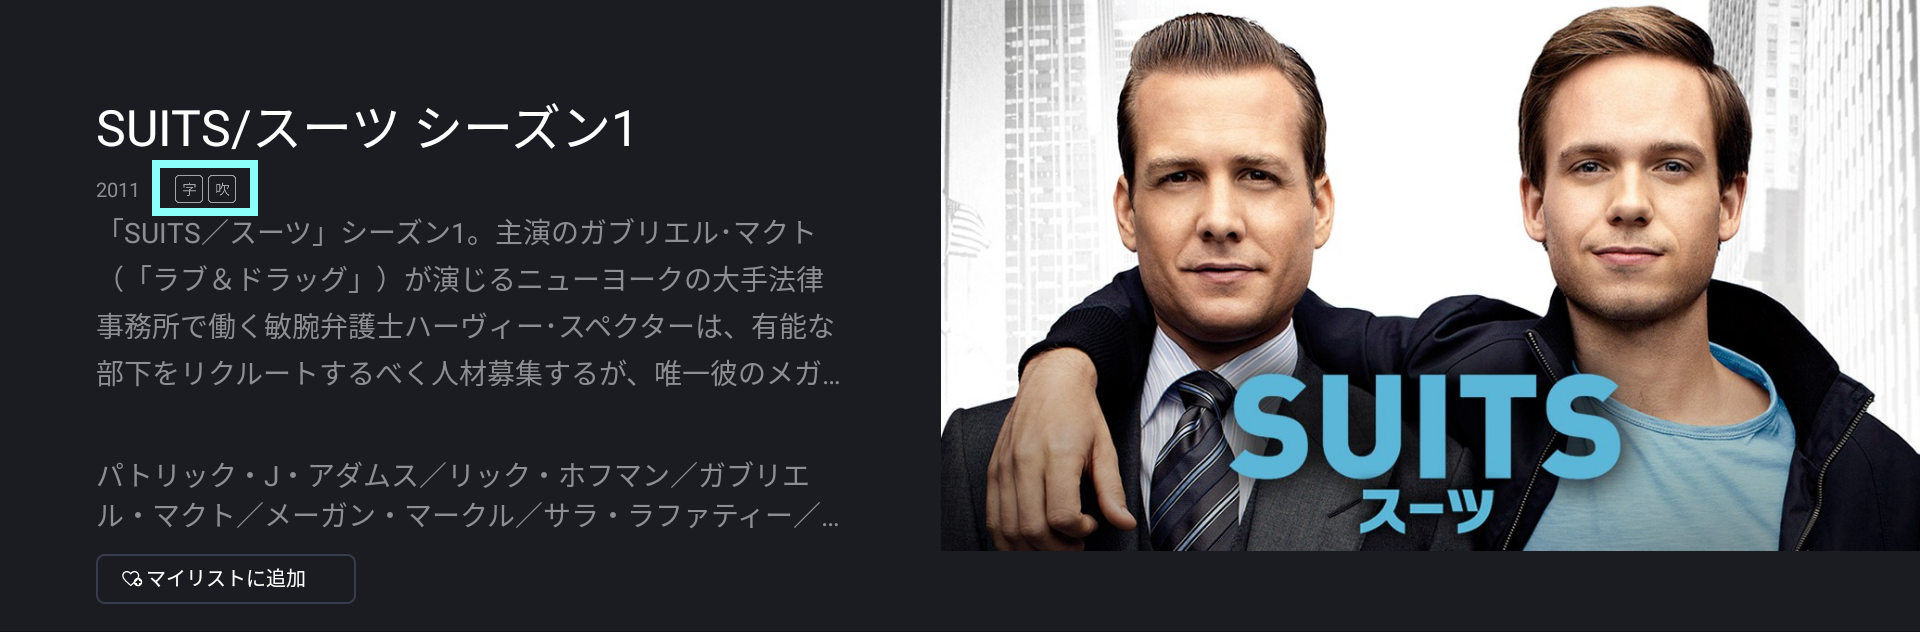 SUITS.png